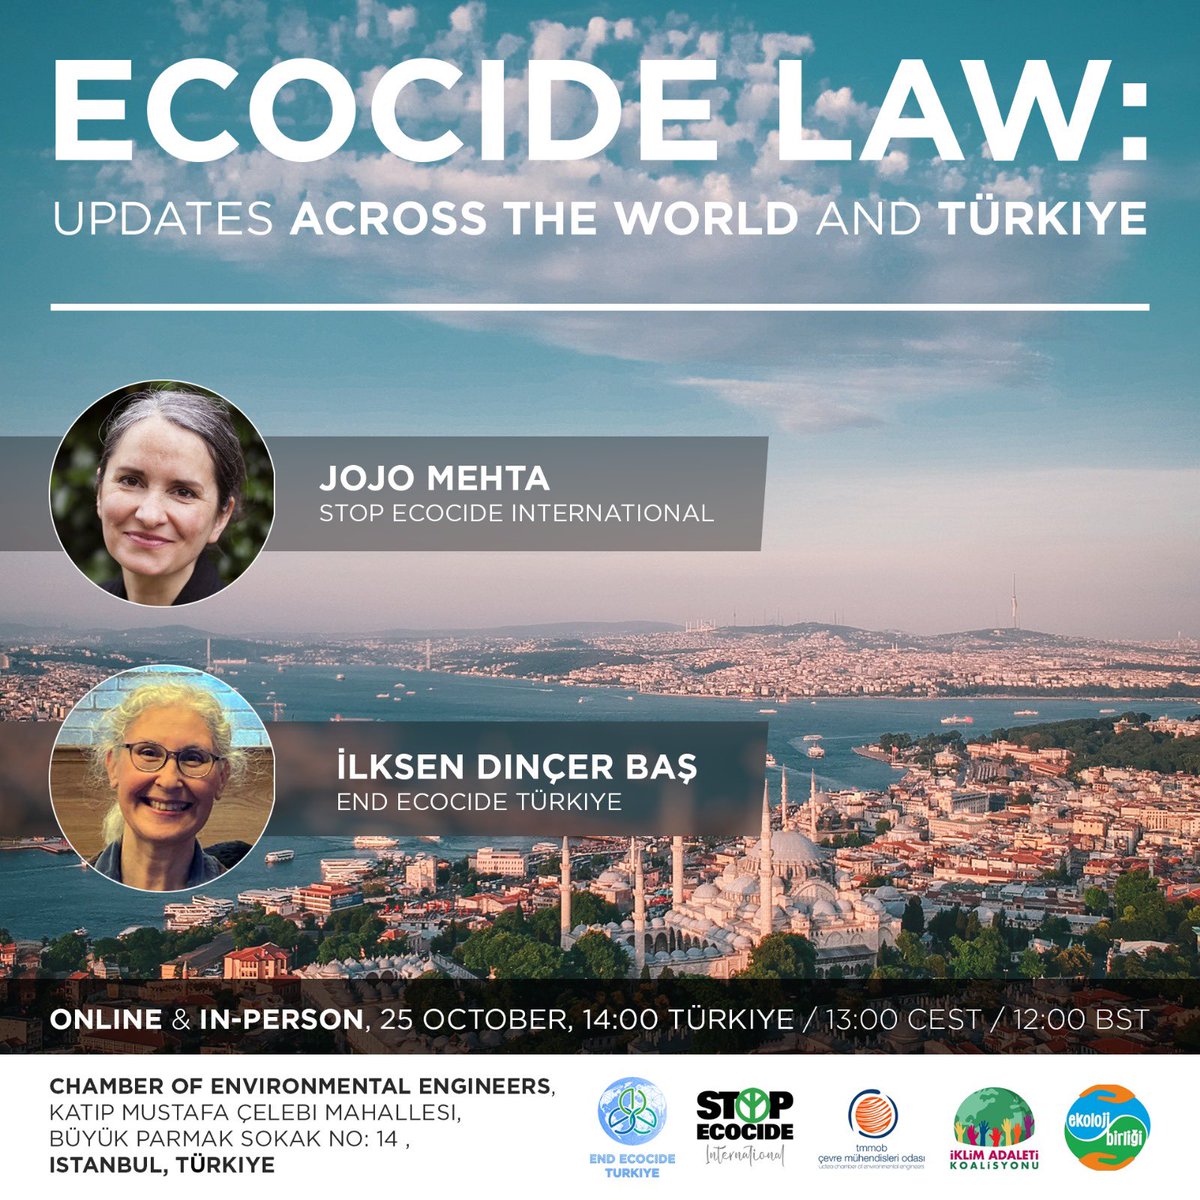 If you would like to learn how the Ecocide Law Proposal is being prepared in the world and in Turkiye, and how a social movement is being structured basing on the rights of nature, you are welcome to the live event. Zoom meeting link: us02web.zoom.us/webinar/regist…